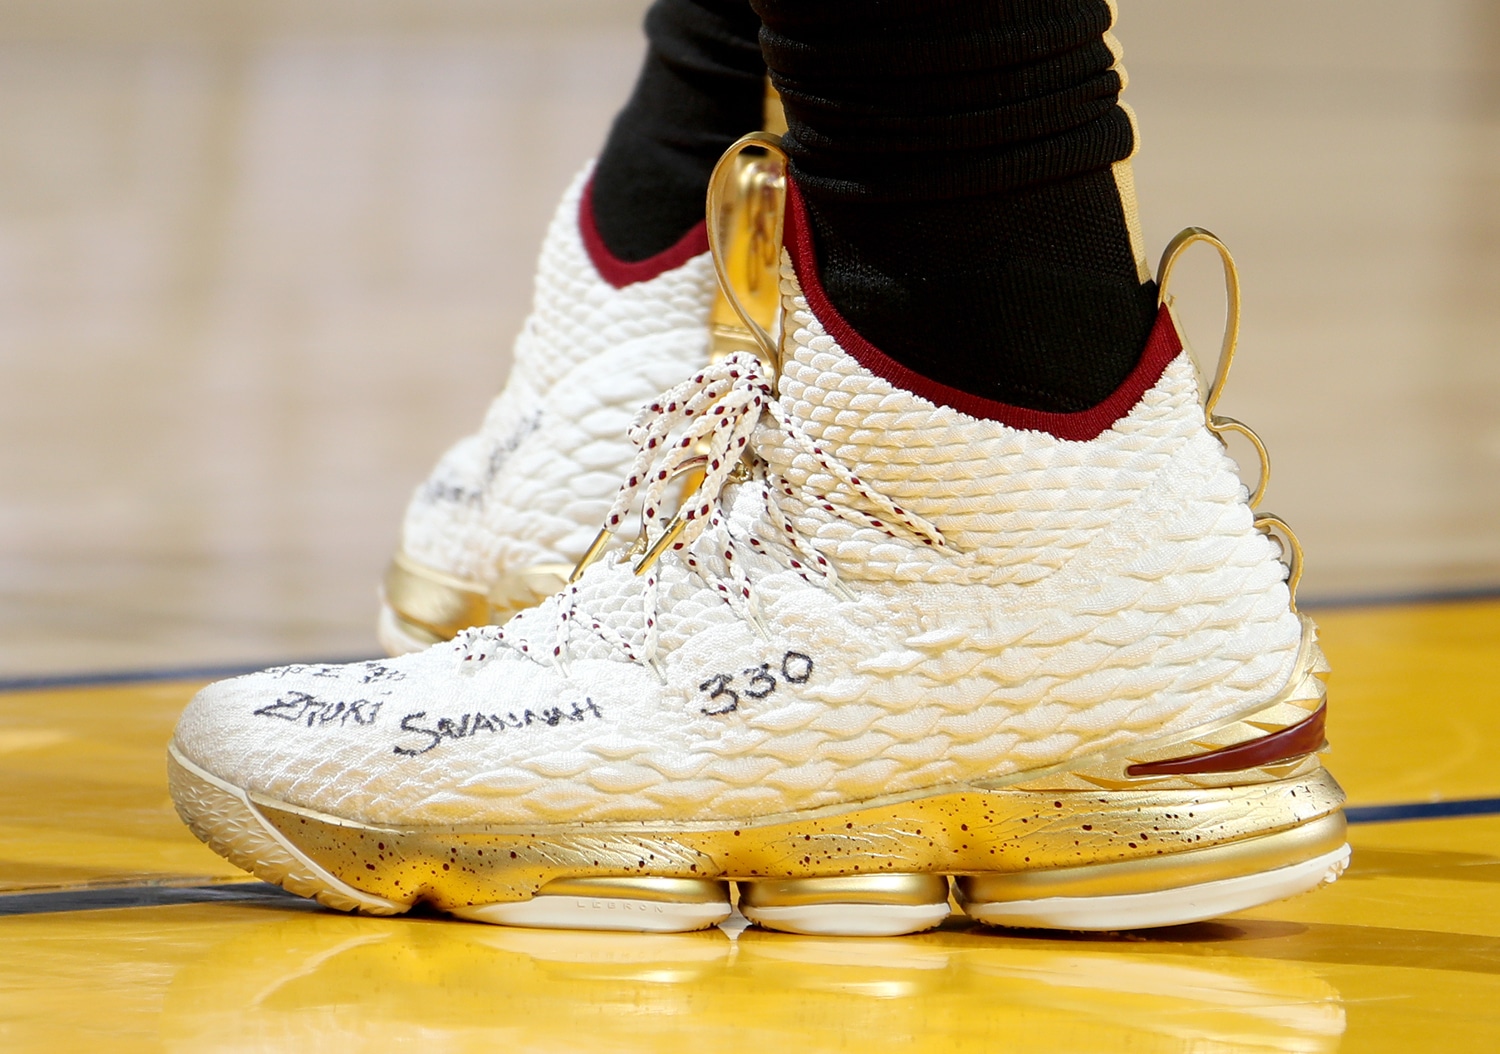 lebron shoes today's game